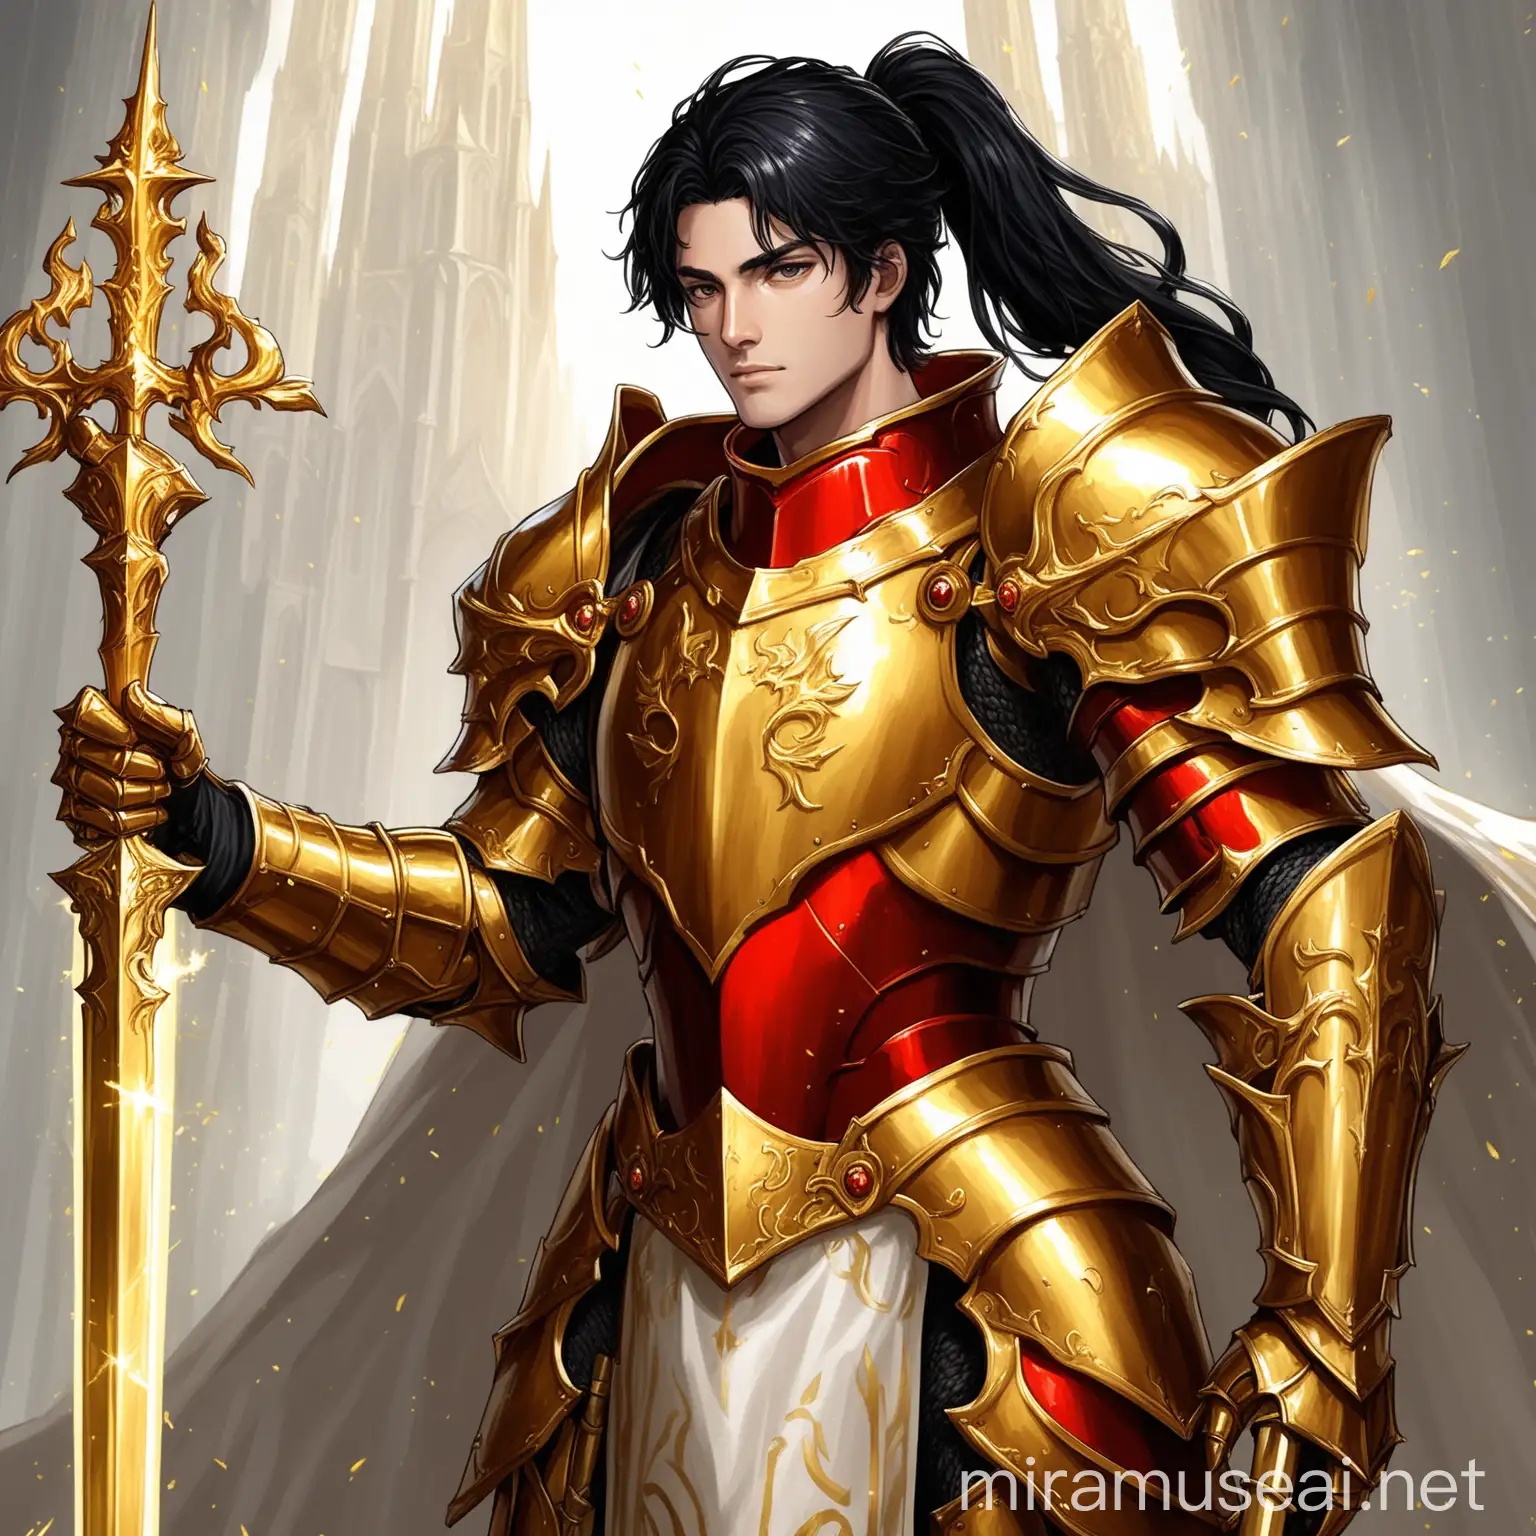 A paladin with a black hair ponytail, and sword in his right hand and a golden scepter in is left hand, a red and gold armor, 